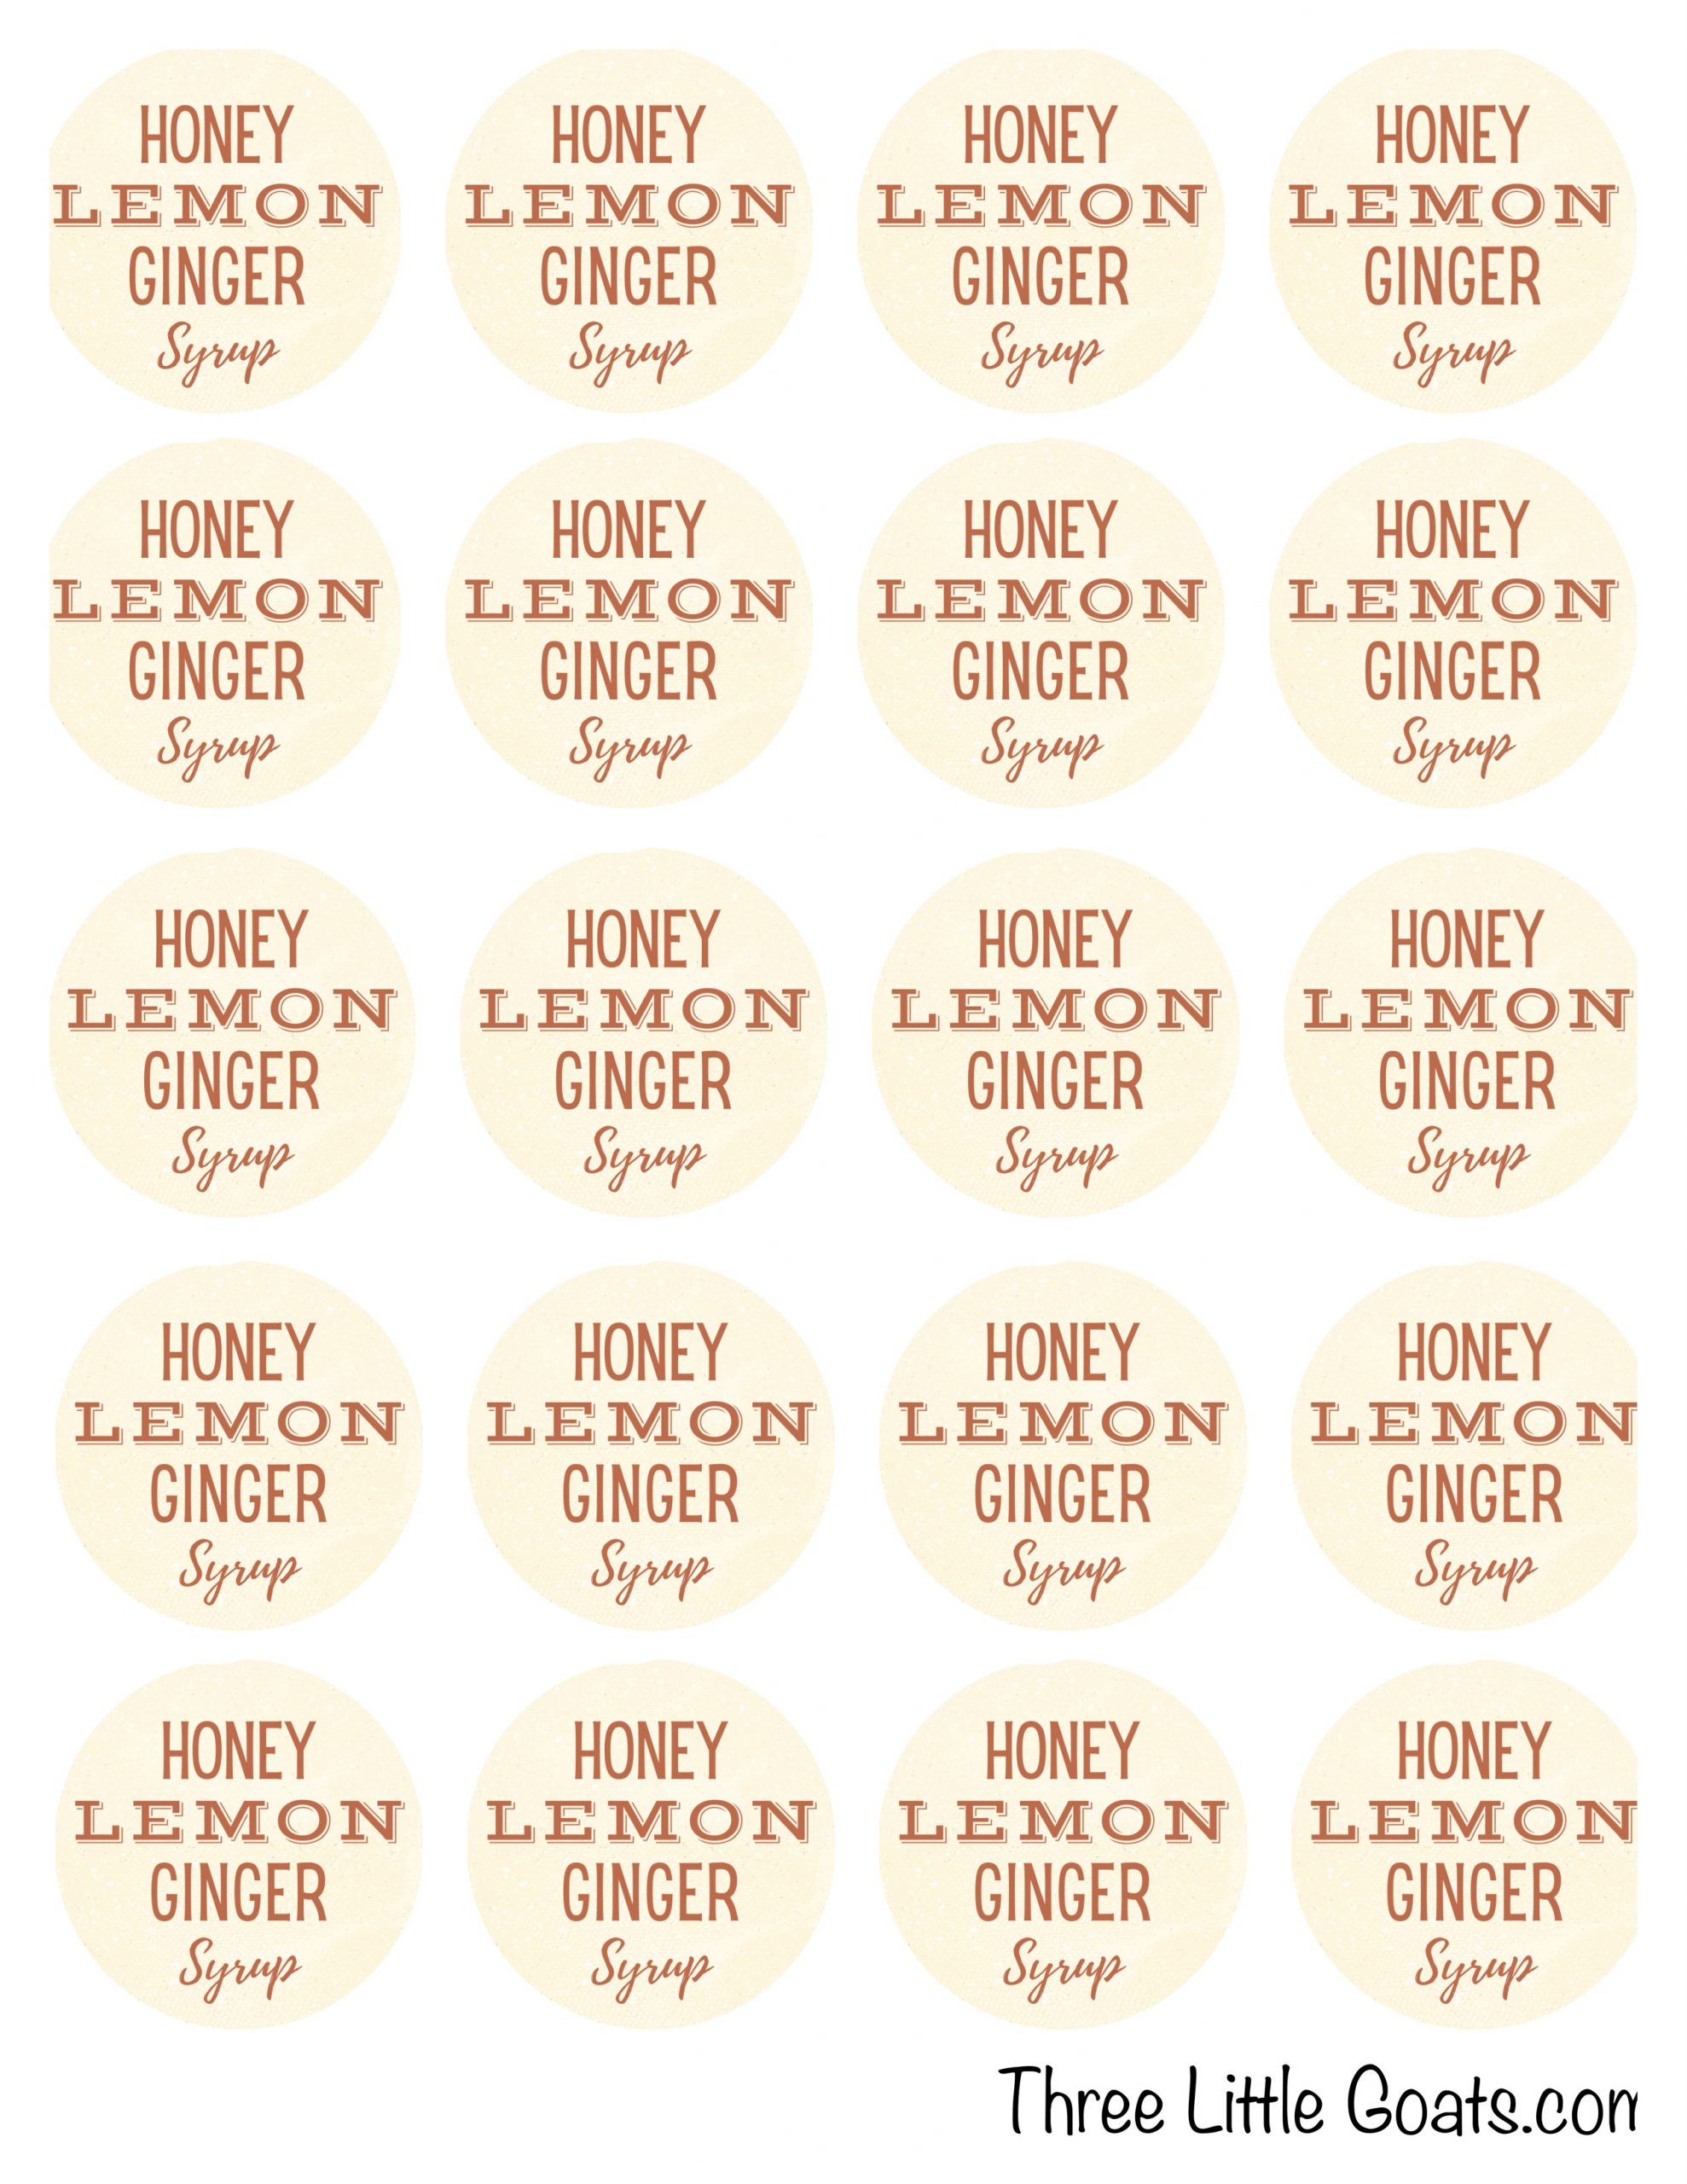 Honey lemon ginger syrup recipe with free printable label